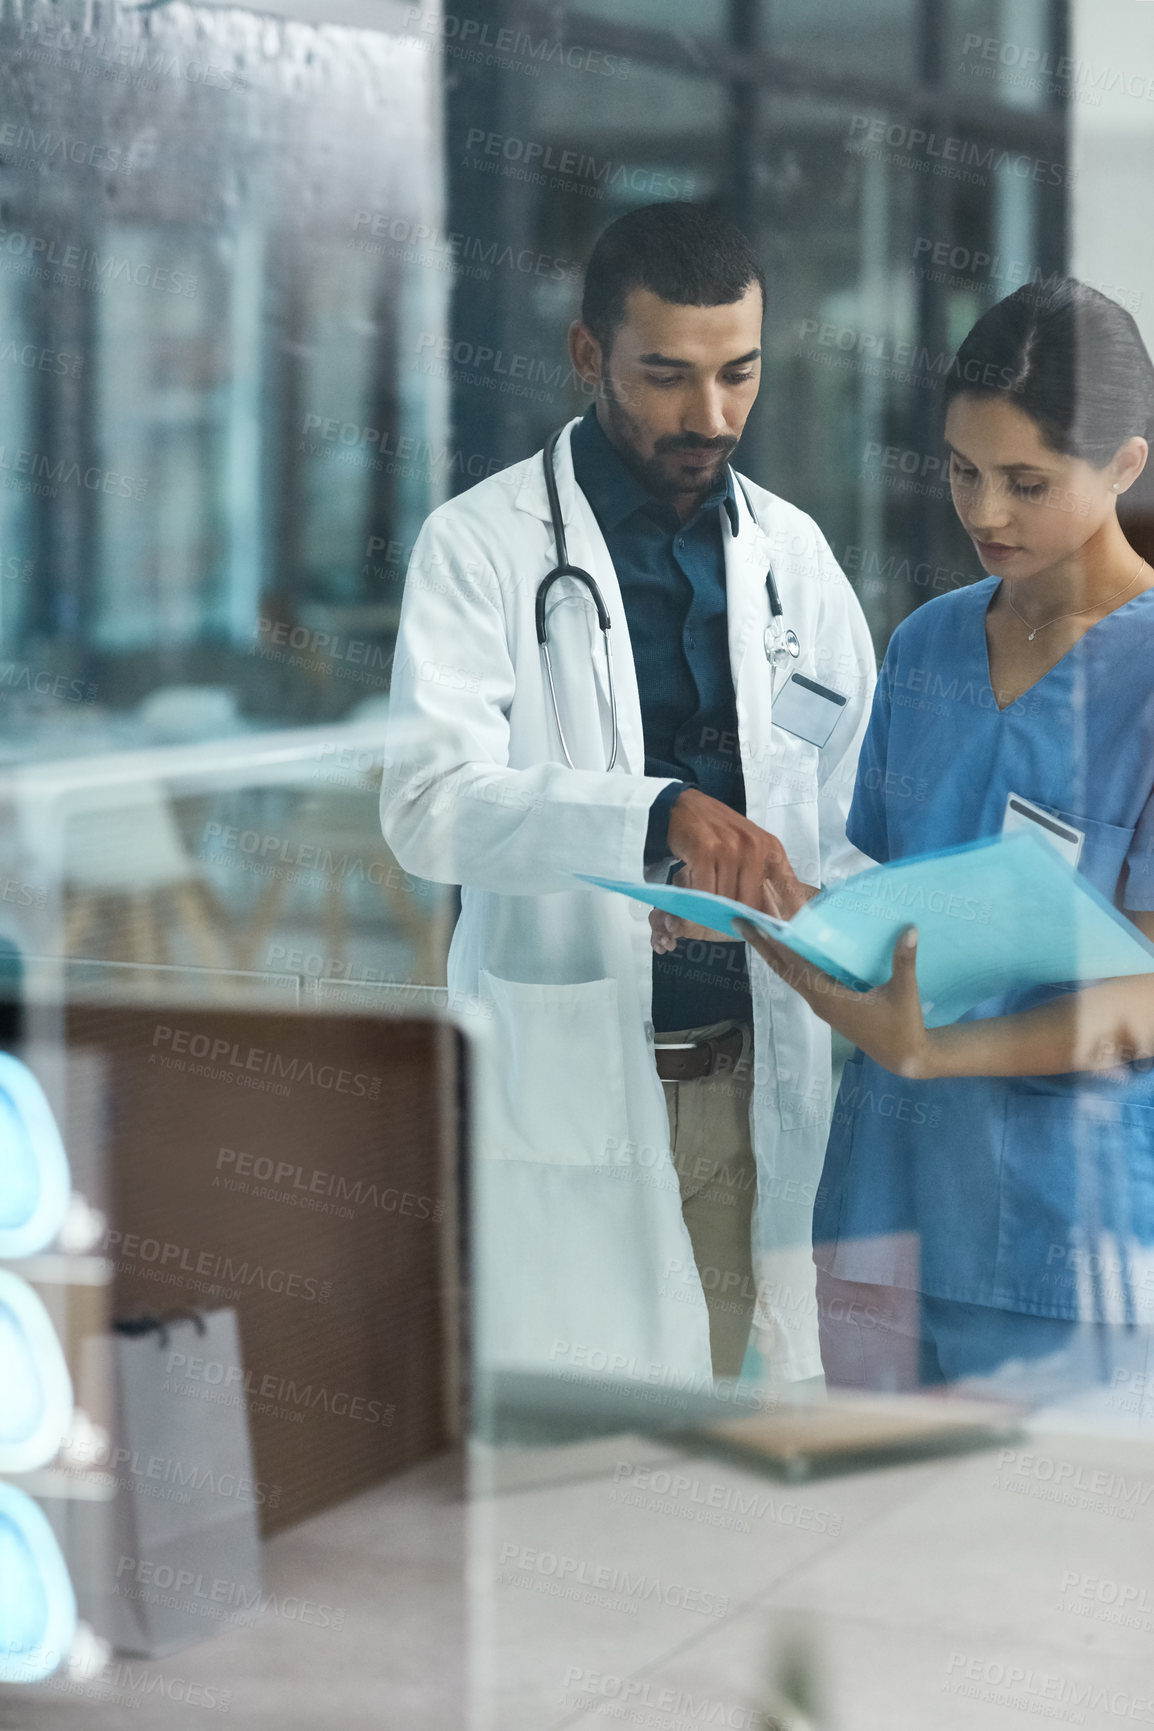 Buy stock photo Shot of two young doctors discussing the contents of a file in a modern hospital